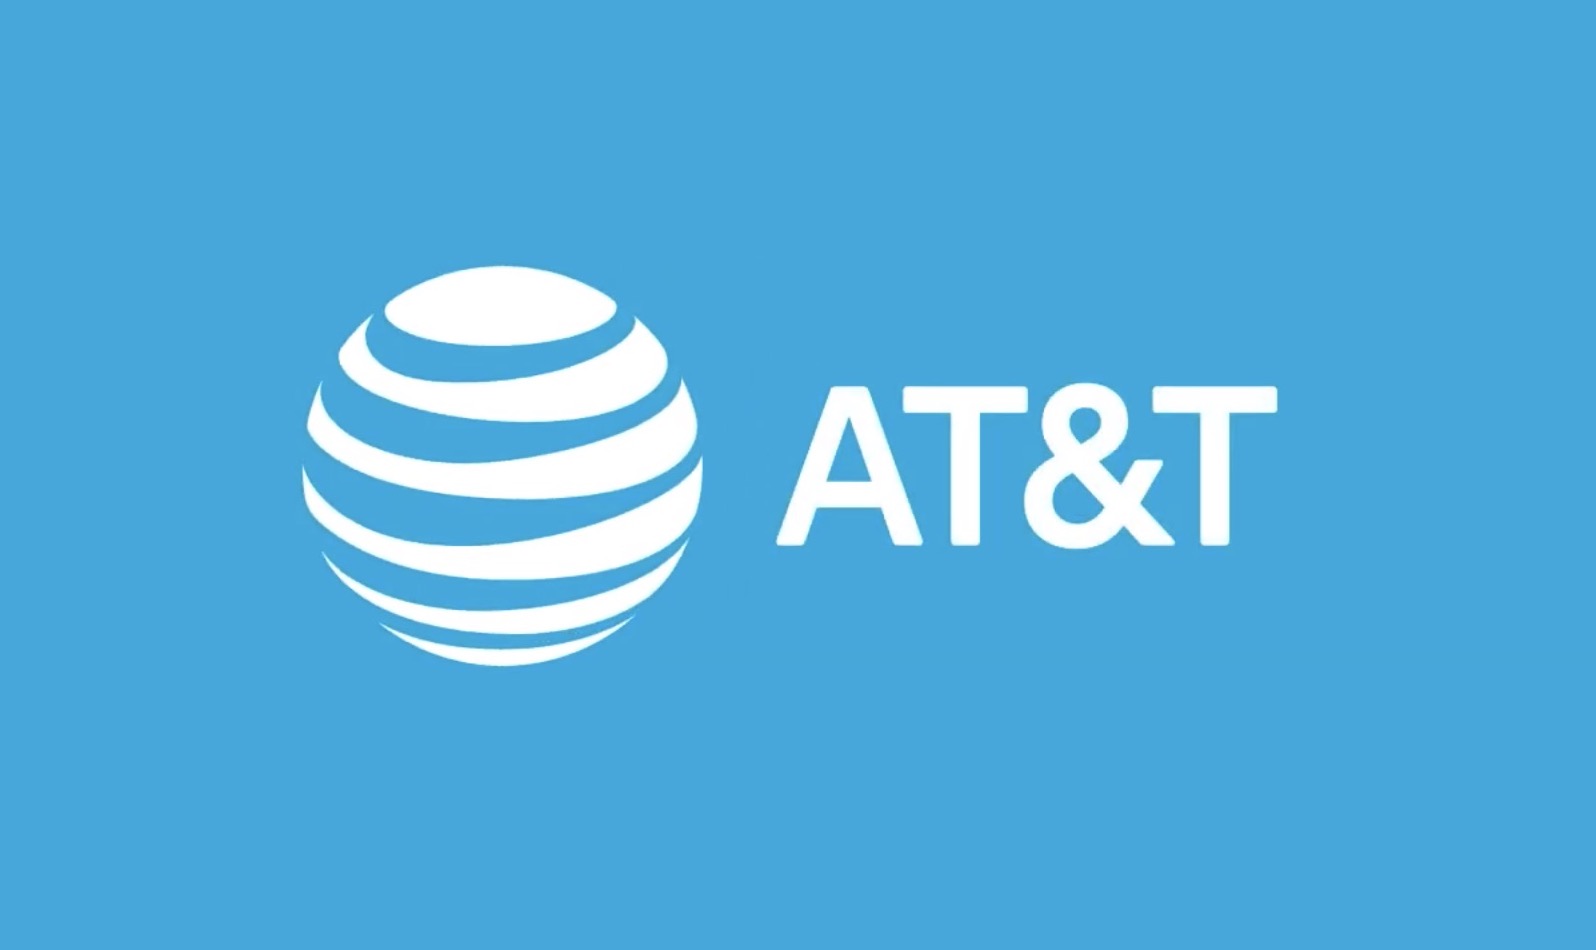 AT&T network technology – 4G LTE, 5G and beyond